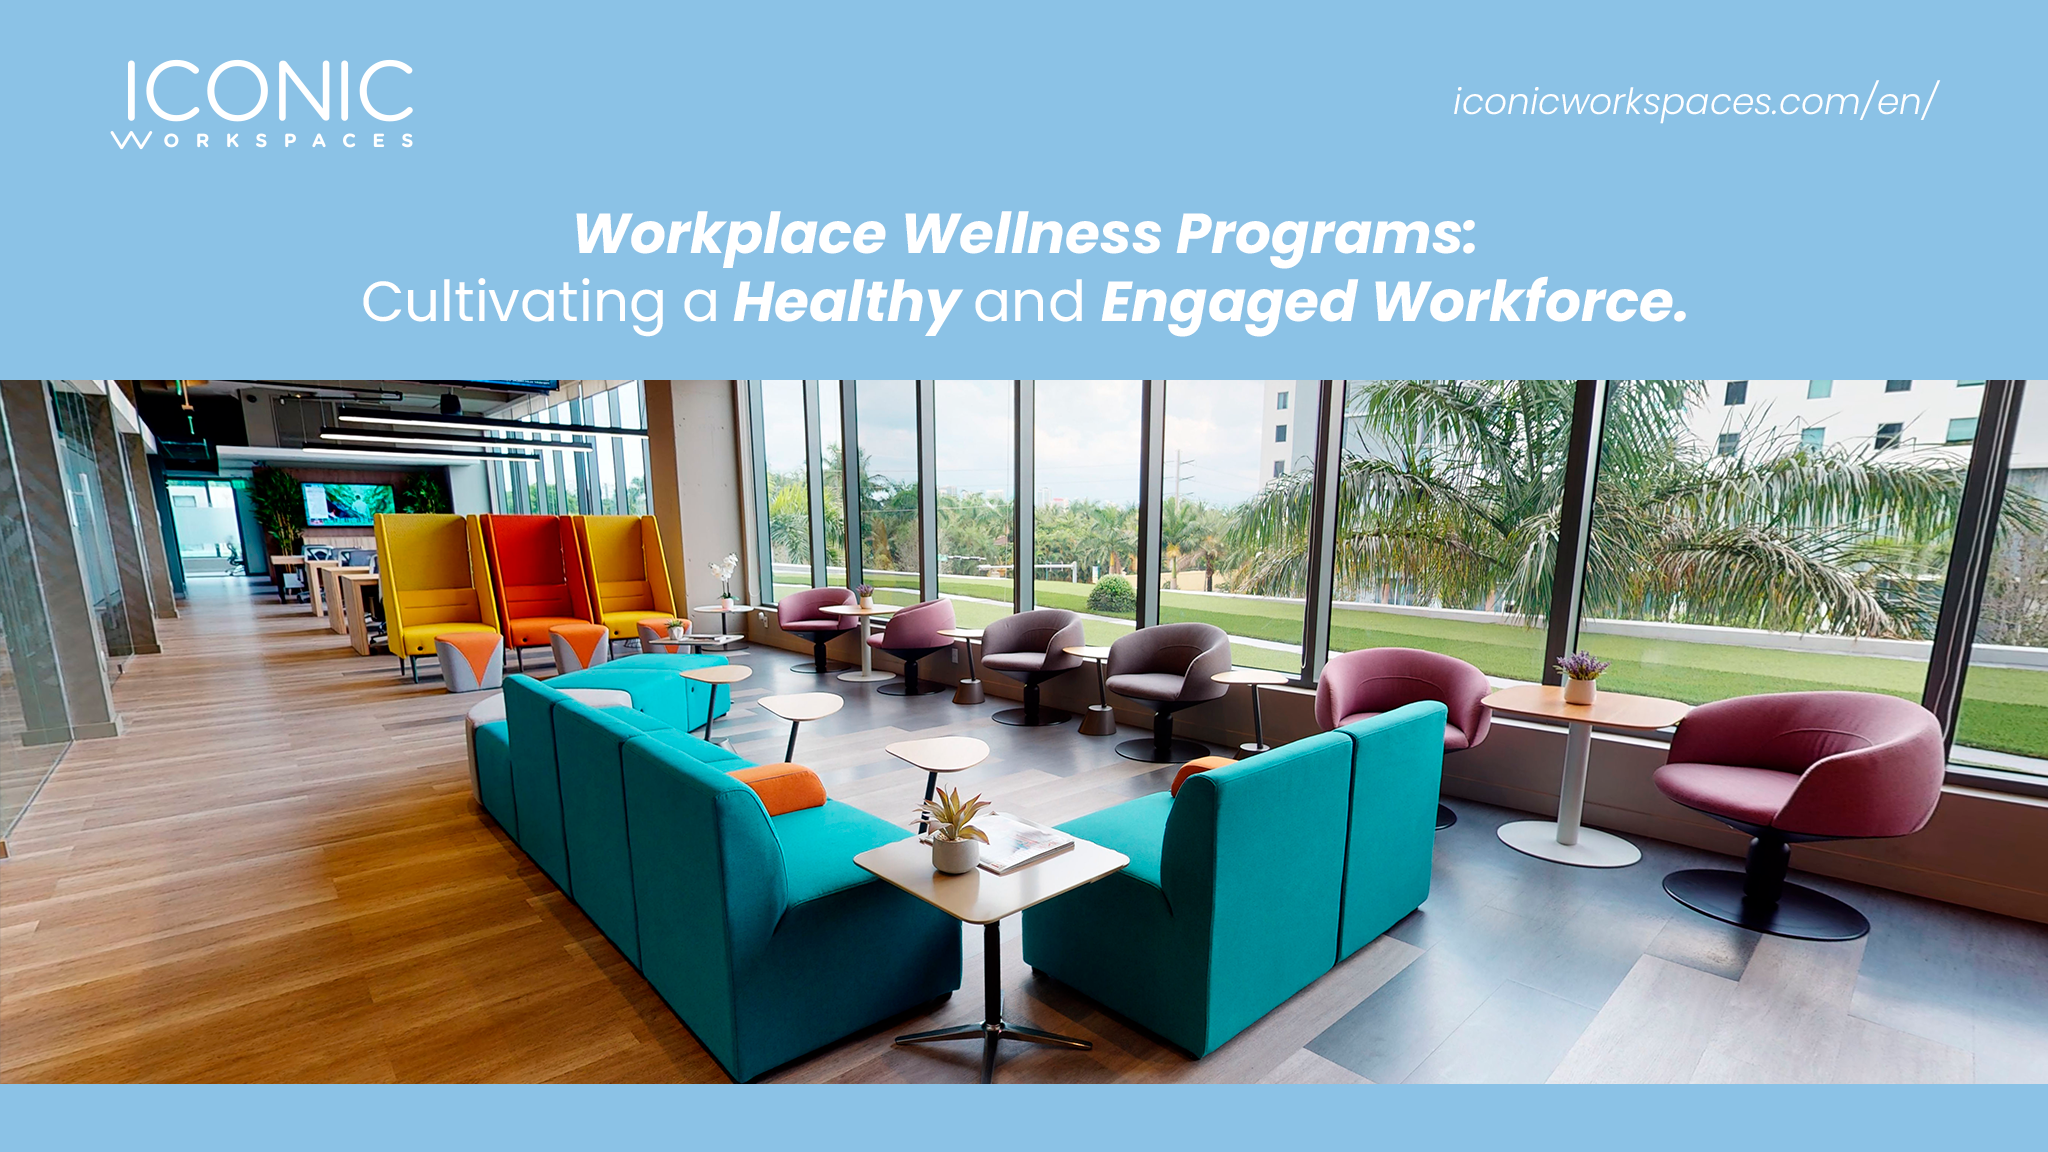 Workplace Wellness Programs: Cultivating a Healthy and Engaged Workforce